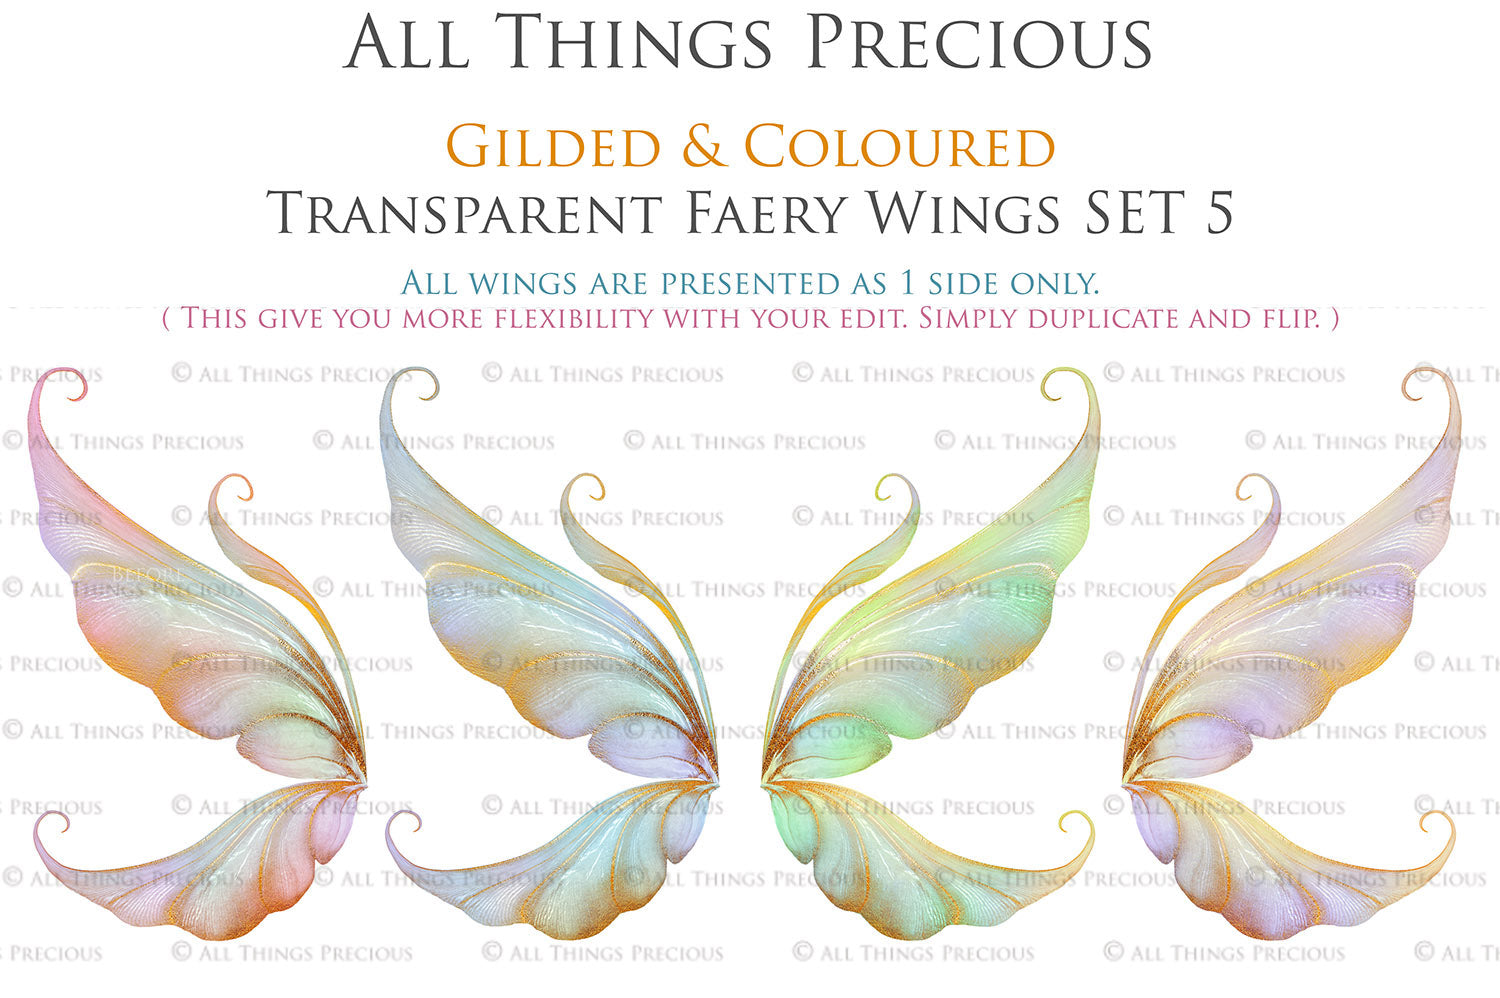 Colour Sparkling fairy wings, Png overlays for photoshop. High resolution transparent, see through wings. Fairycore, Cosplay, Photographers, Photoshop Edits, Digital overlay for photography. Digital stock and resources. Graphic design. Colourful, Gold, Fantasy Wing Bundle. Assets for Fine Art design. By ATP Textures